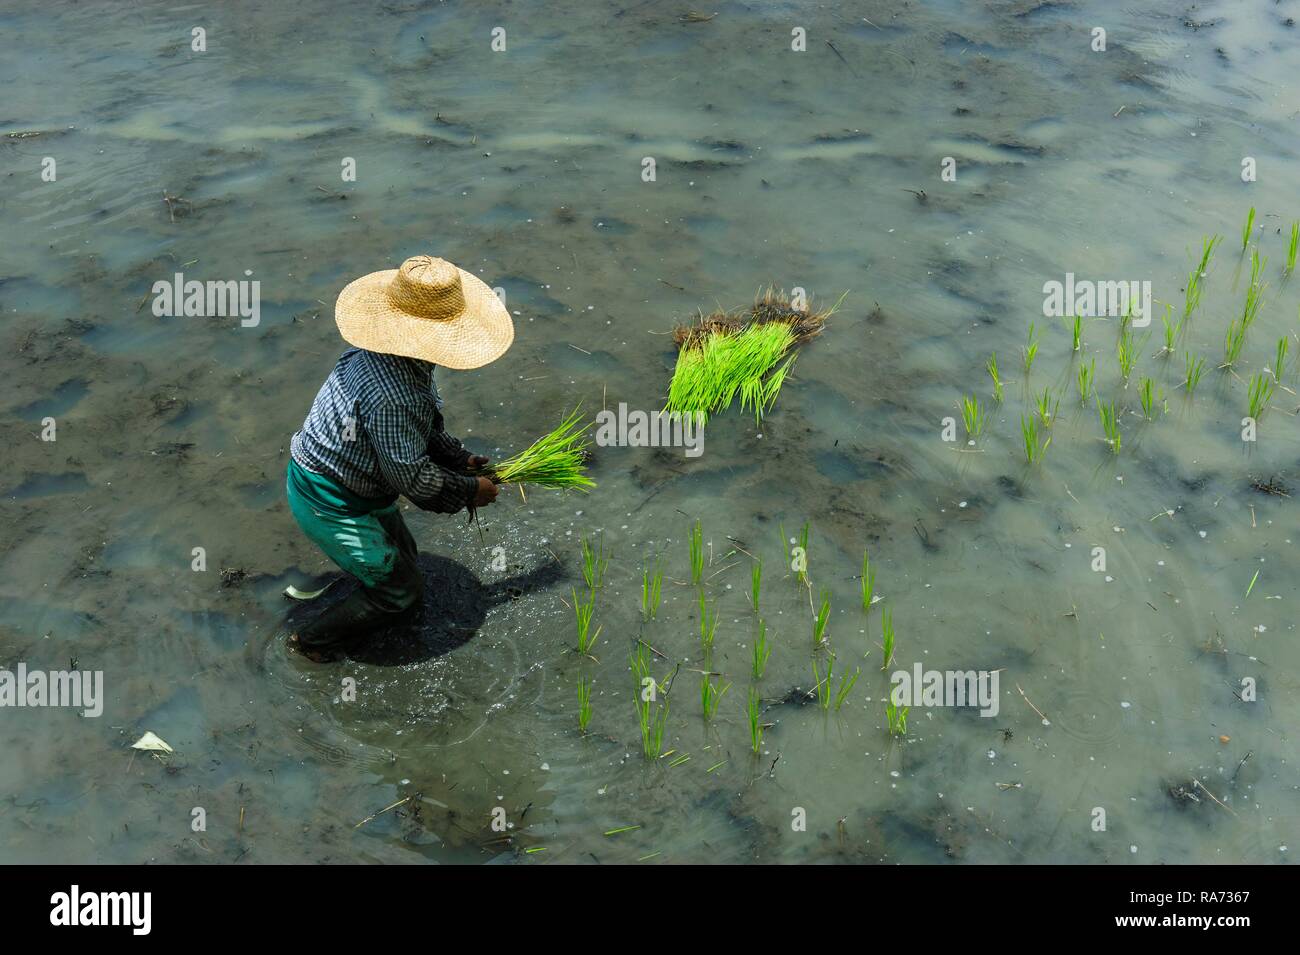 Worker in rice field, Banaue, Northern Luzon, Philippines Stock Photo